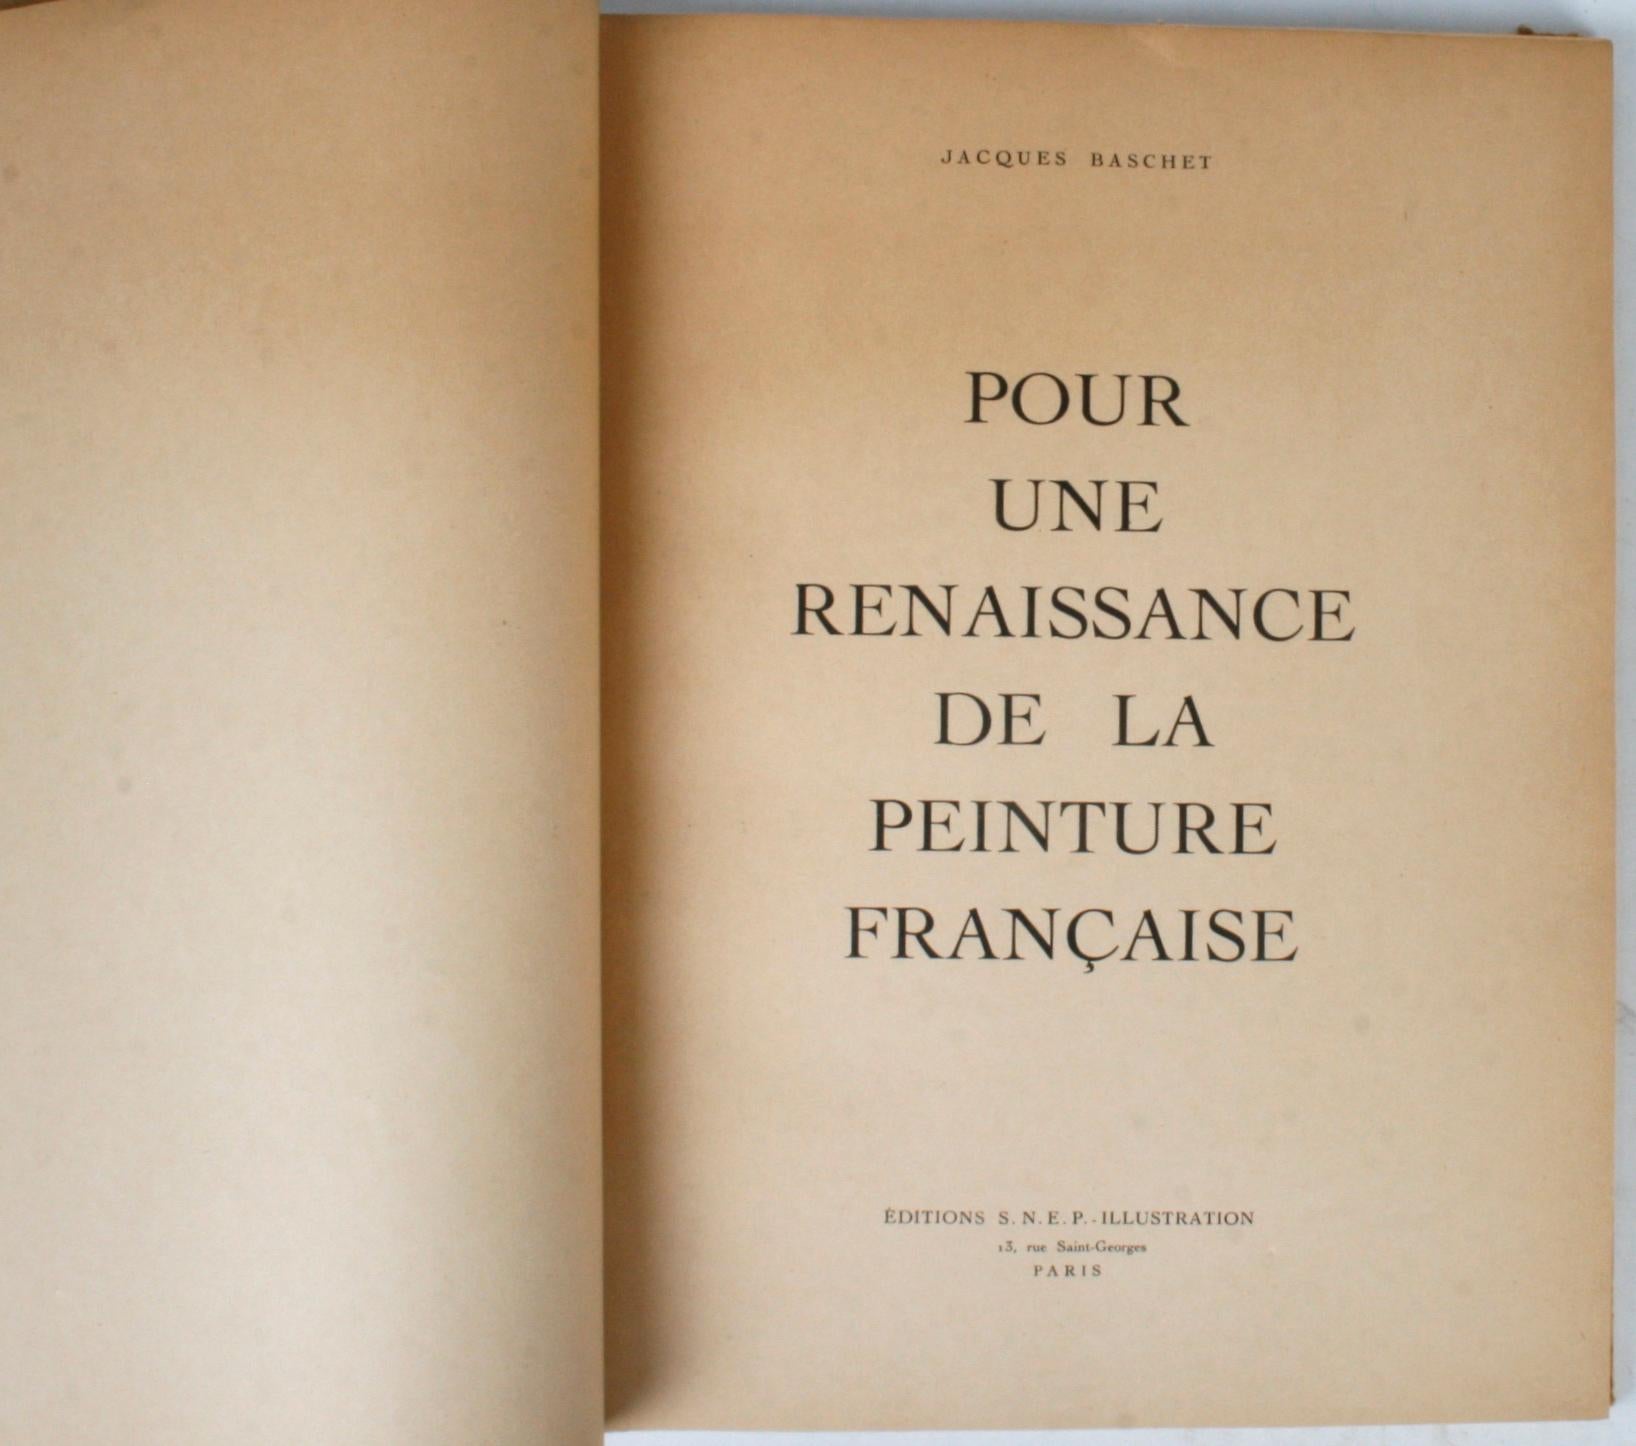 Pour une Renaissance de la Peinture Français by Jacques Baschet. Paris: Édition S.N.E.P. Illustration, 1946. Soft cover with French text. 114 pp. An oversized art book on the rebirth of French painting from the 12th century to 1943. Each work of art